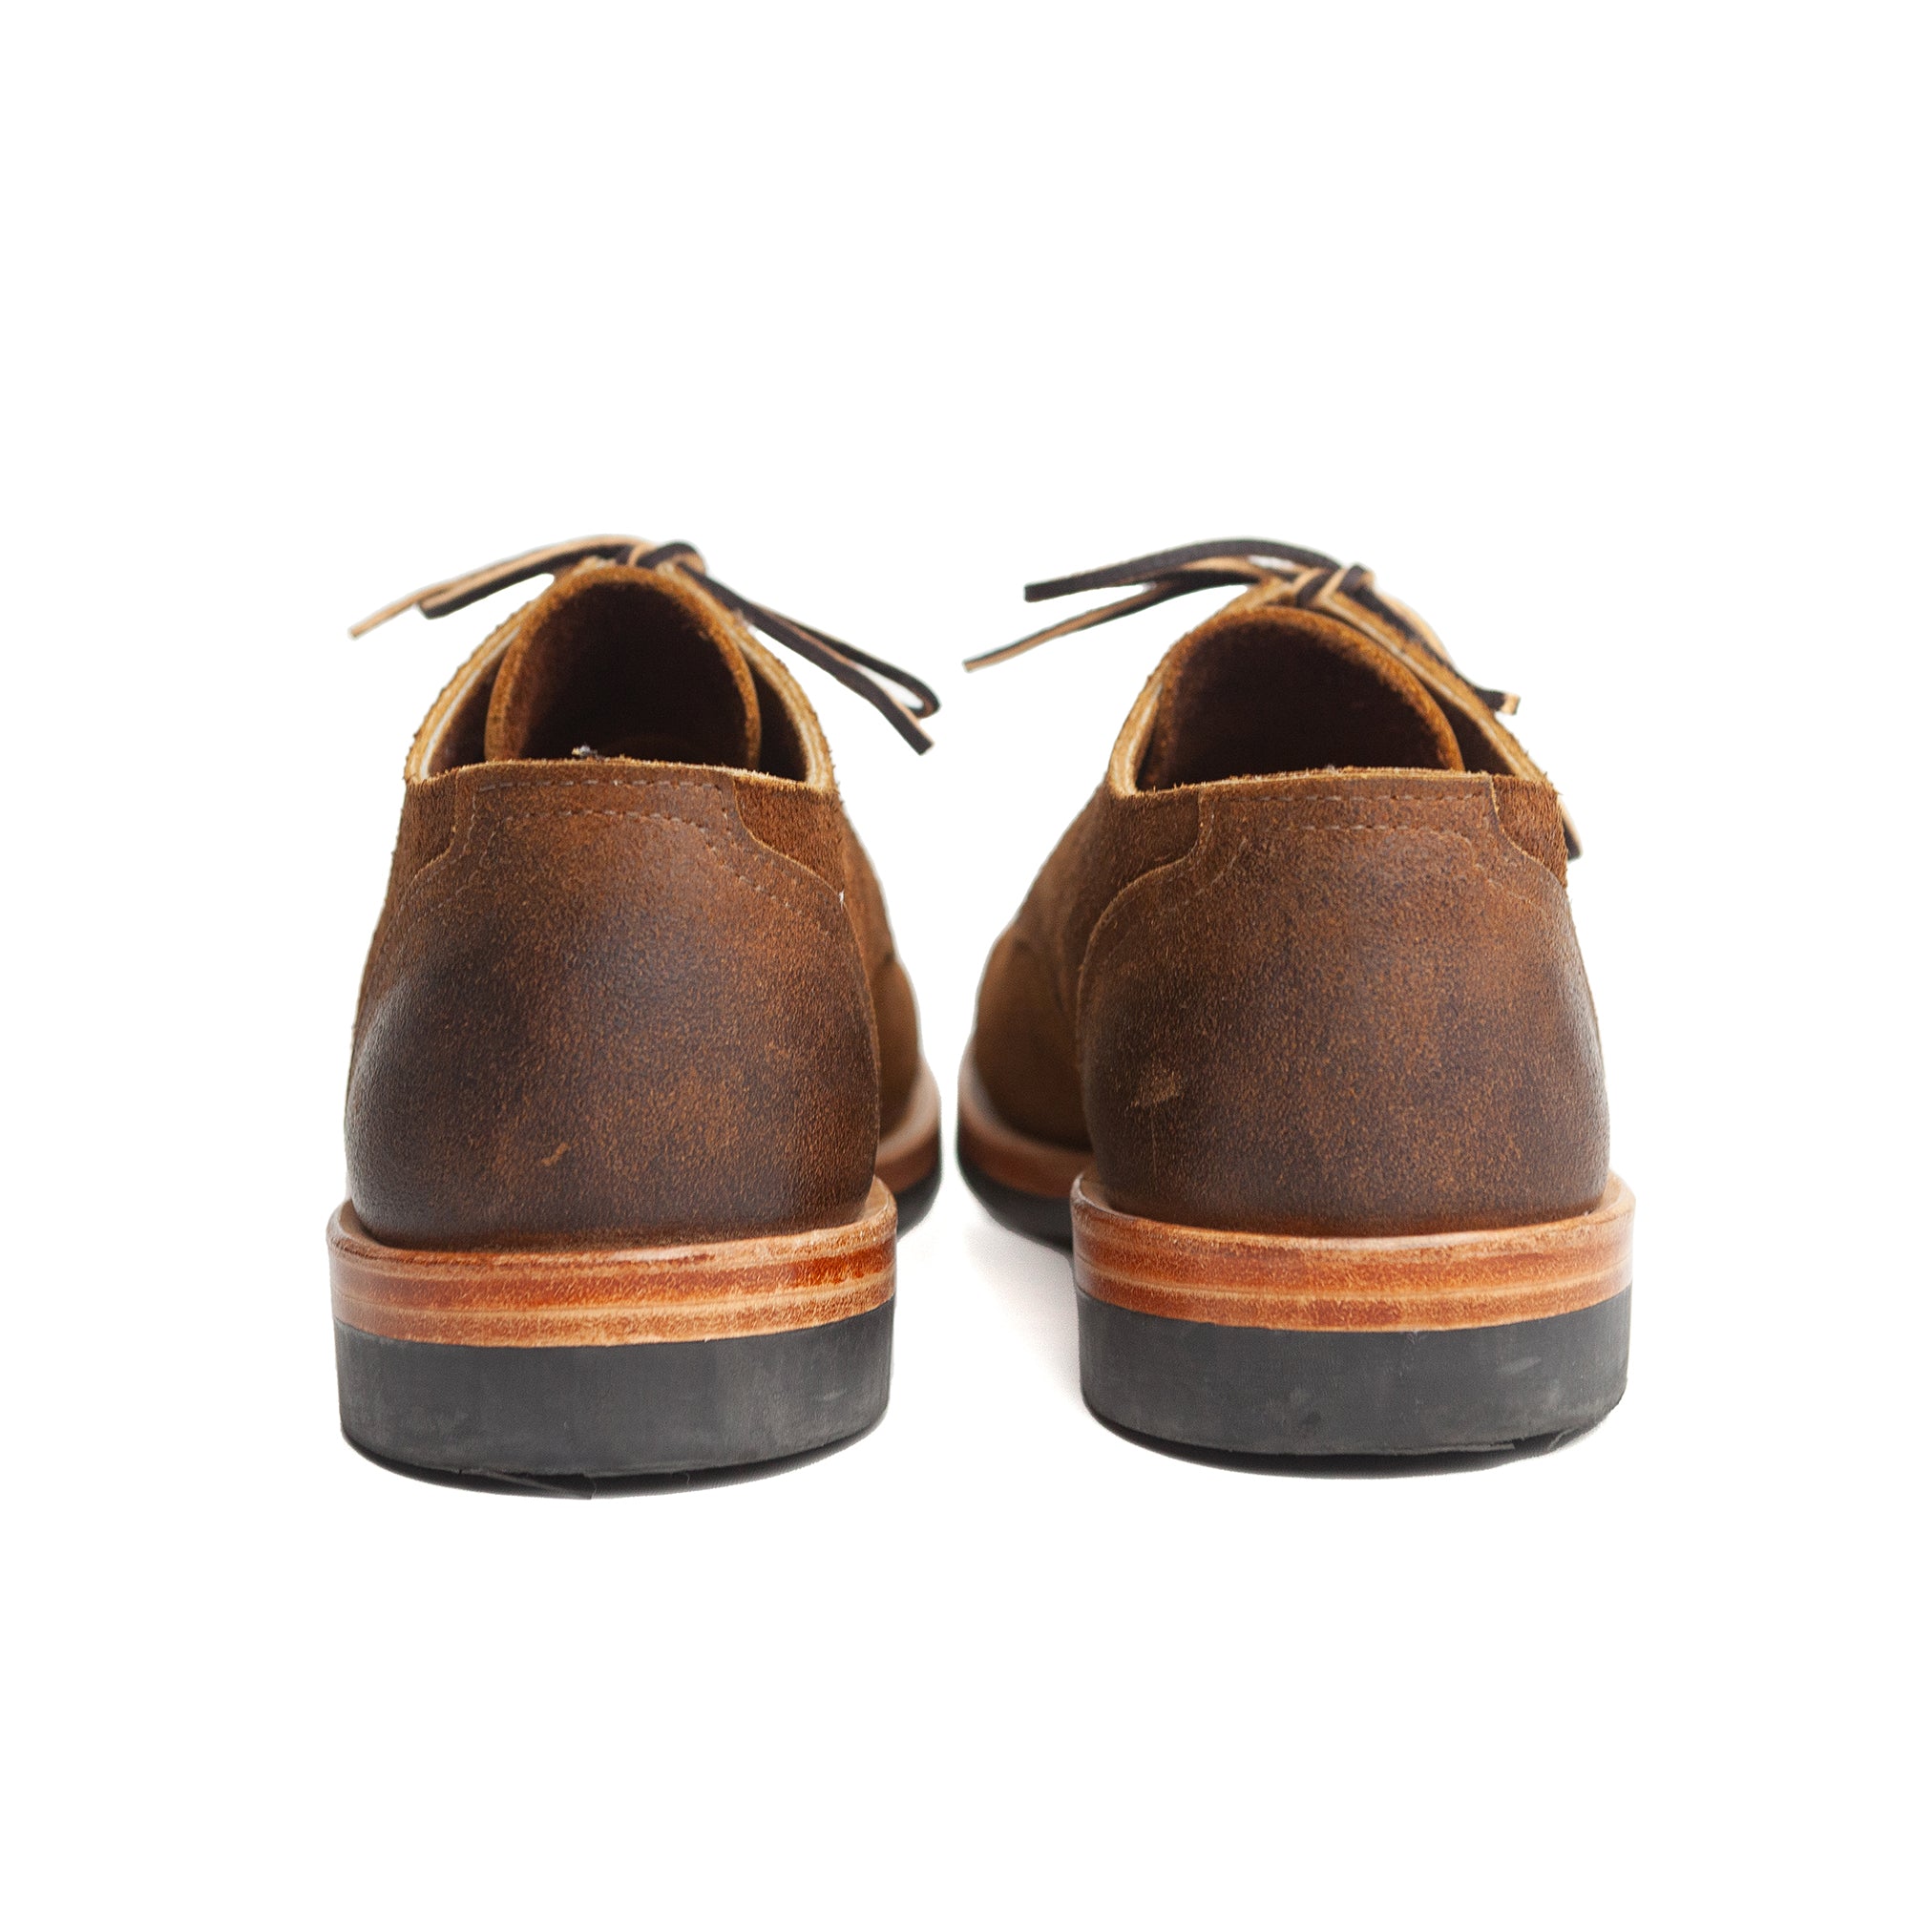 Trench Oxford in Trail Crazy Horse Roughout - 42 EU